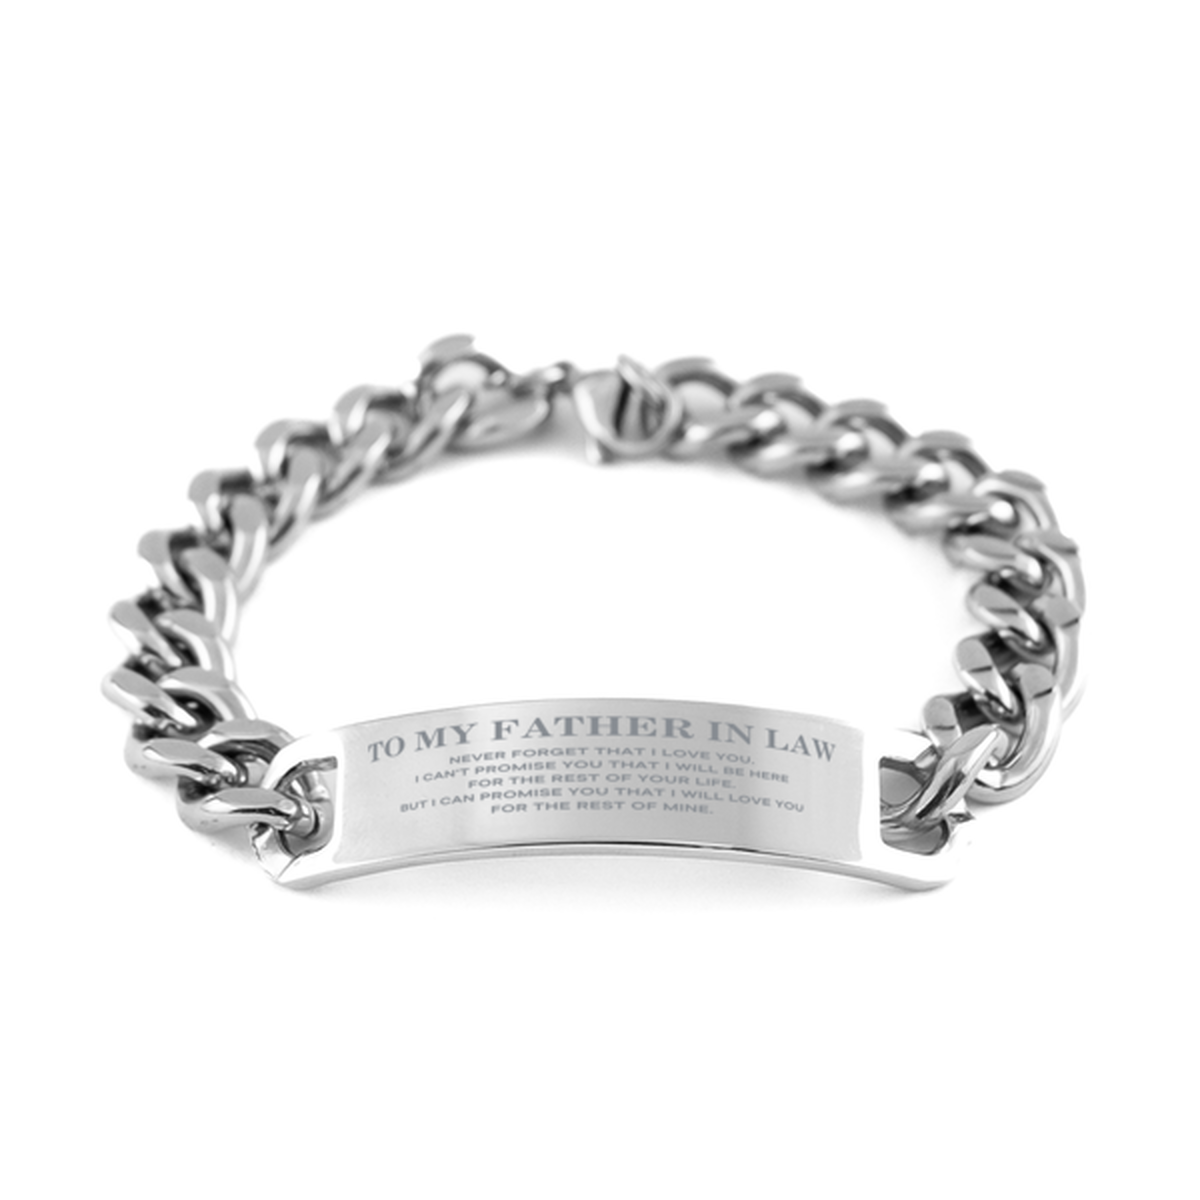 To My Father In Law Gifts, I will love you for the rest of mine, Love Father In Law Bracelet, Birthday Christmas Unique Cuban Chain Stainless Steel Bracelet For Father In Law